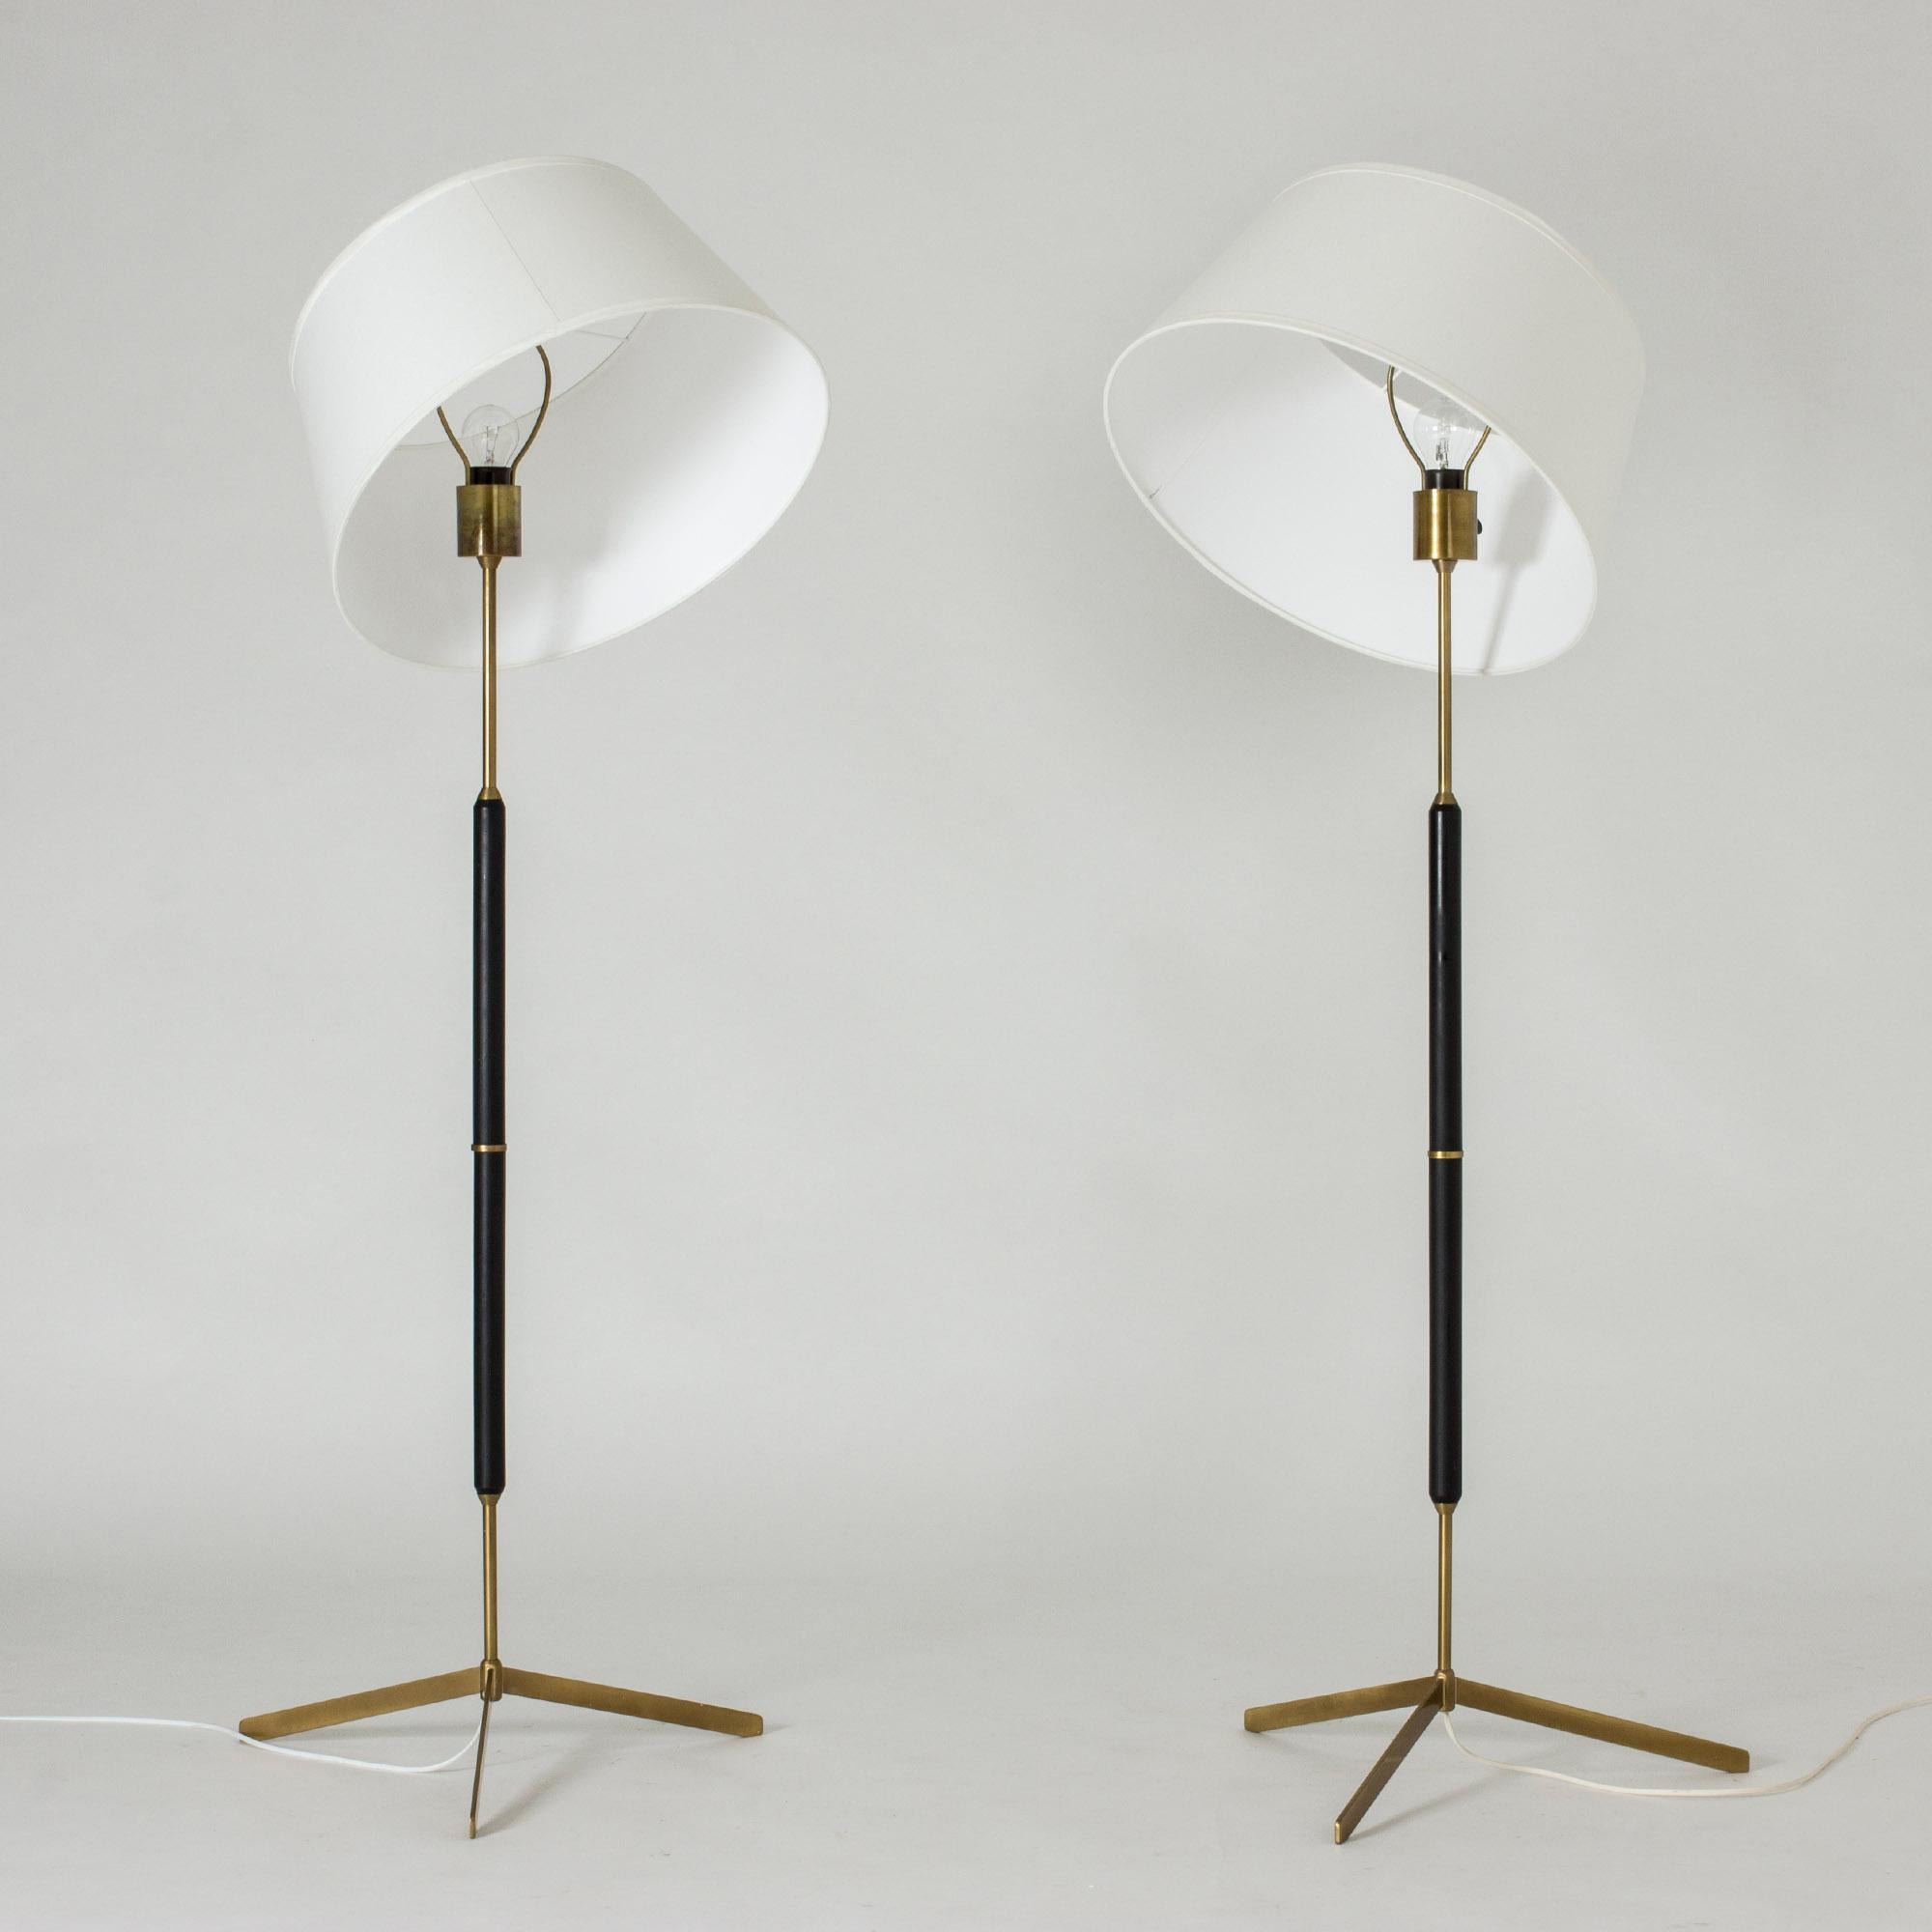 Very elegant pair of floor lamps by the Swedish publisher Bergboms with its tripod base, from the 1950s. The assembly of materials with the black wooden shaft, the structure and the brass ring gives it its original and modernist aesthetic.